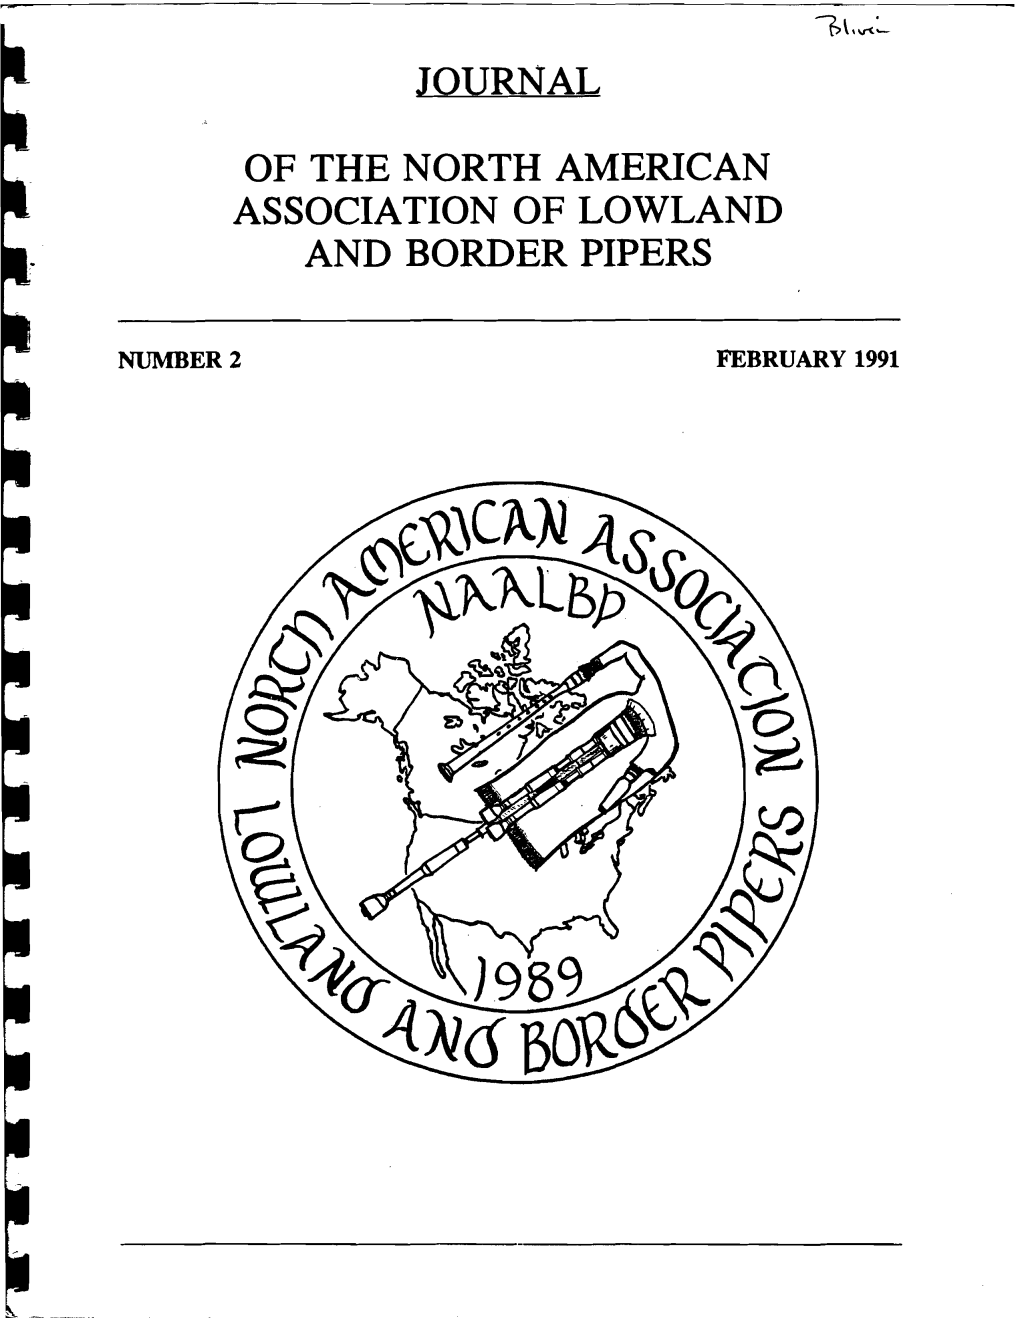 JOURNAL of the North American Association of Lowland and Border Pipers (N.A.A.L.B.P.I Is Published by Brian and Michele Mccandless for the N.A.A.L.B.P